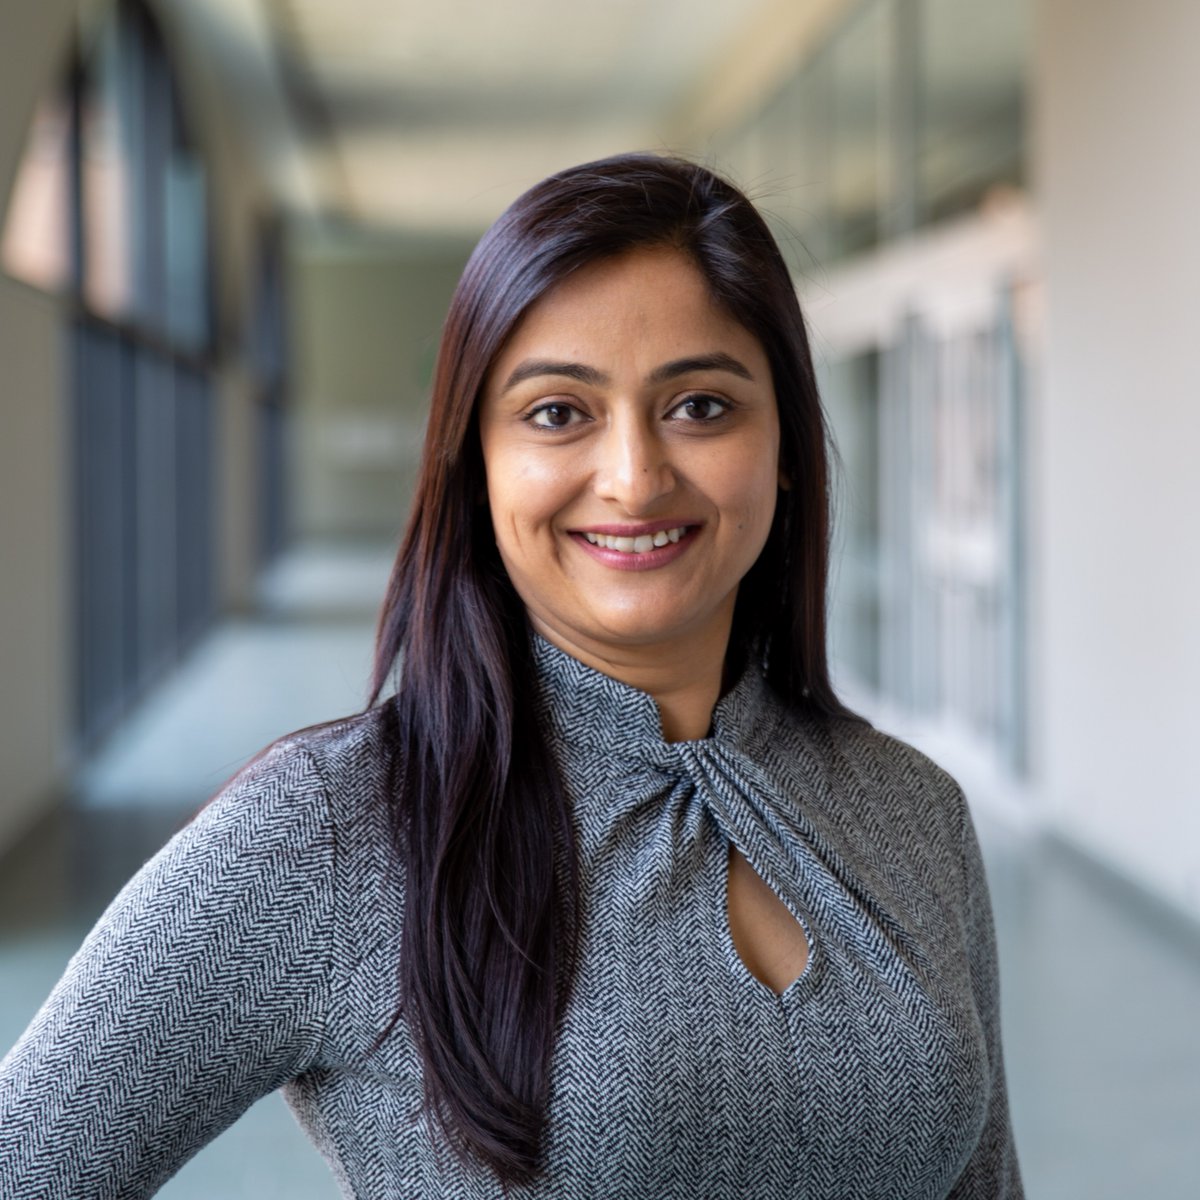 Gagan Pawar, MD, MBA’22, was a year into our Physician MBA Program when she was offered the role of interim CEO. She shares how the program helped her prepare for the role and lead change. bit.ly/3GKOB1R